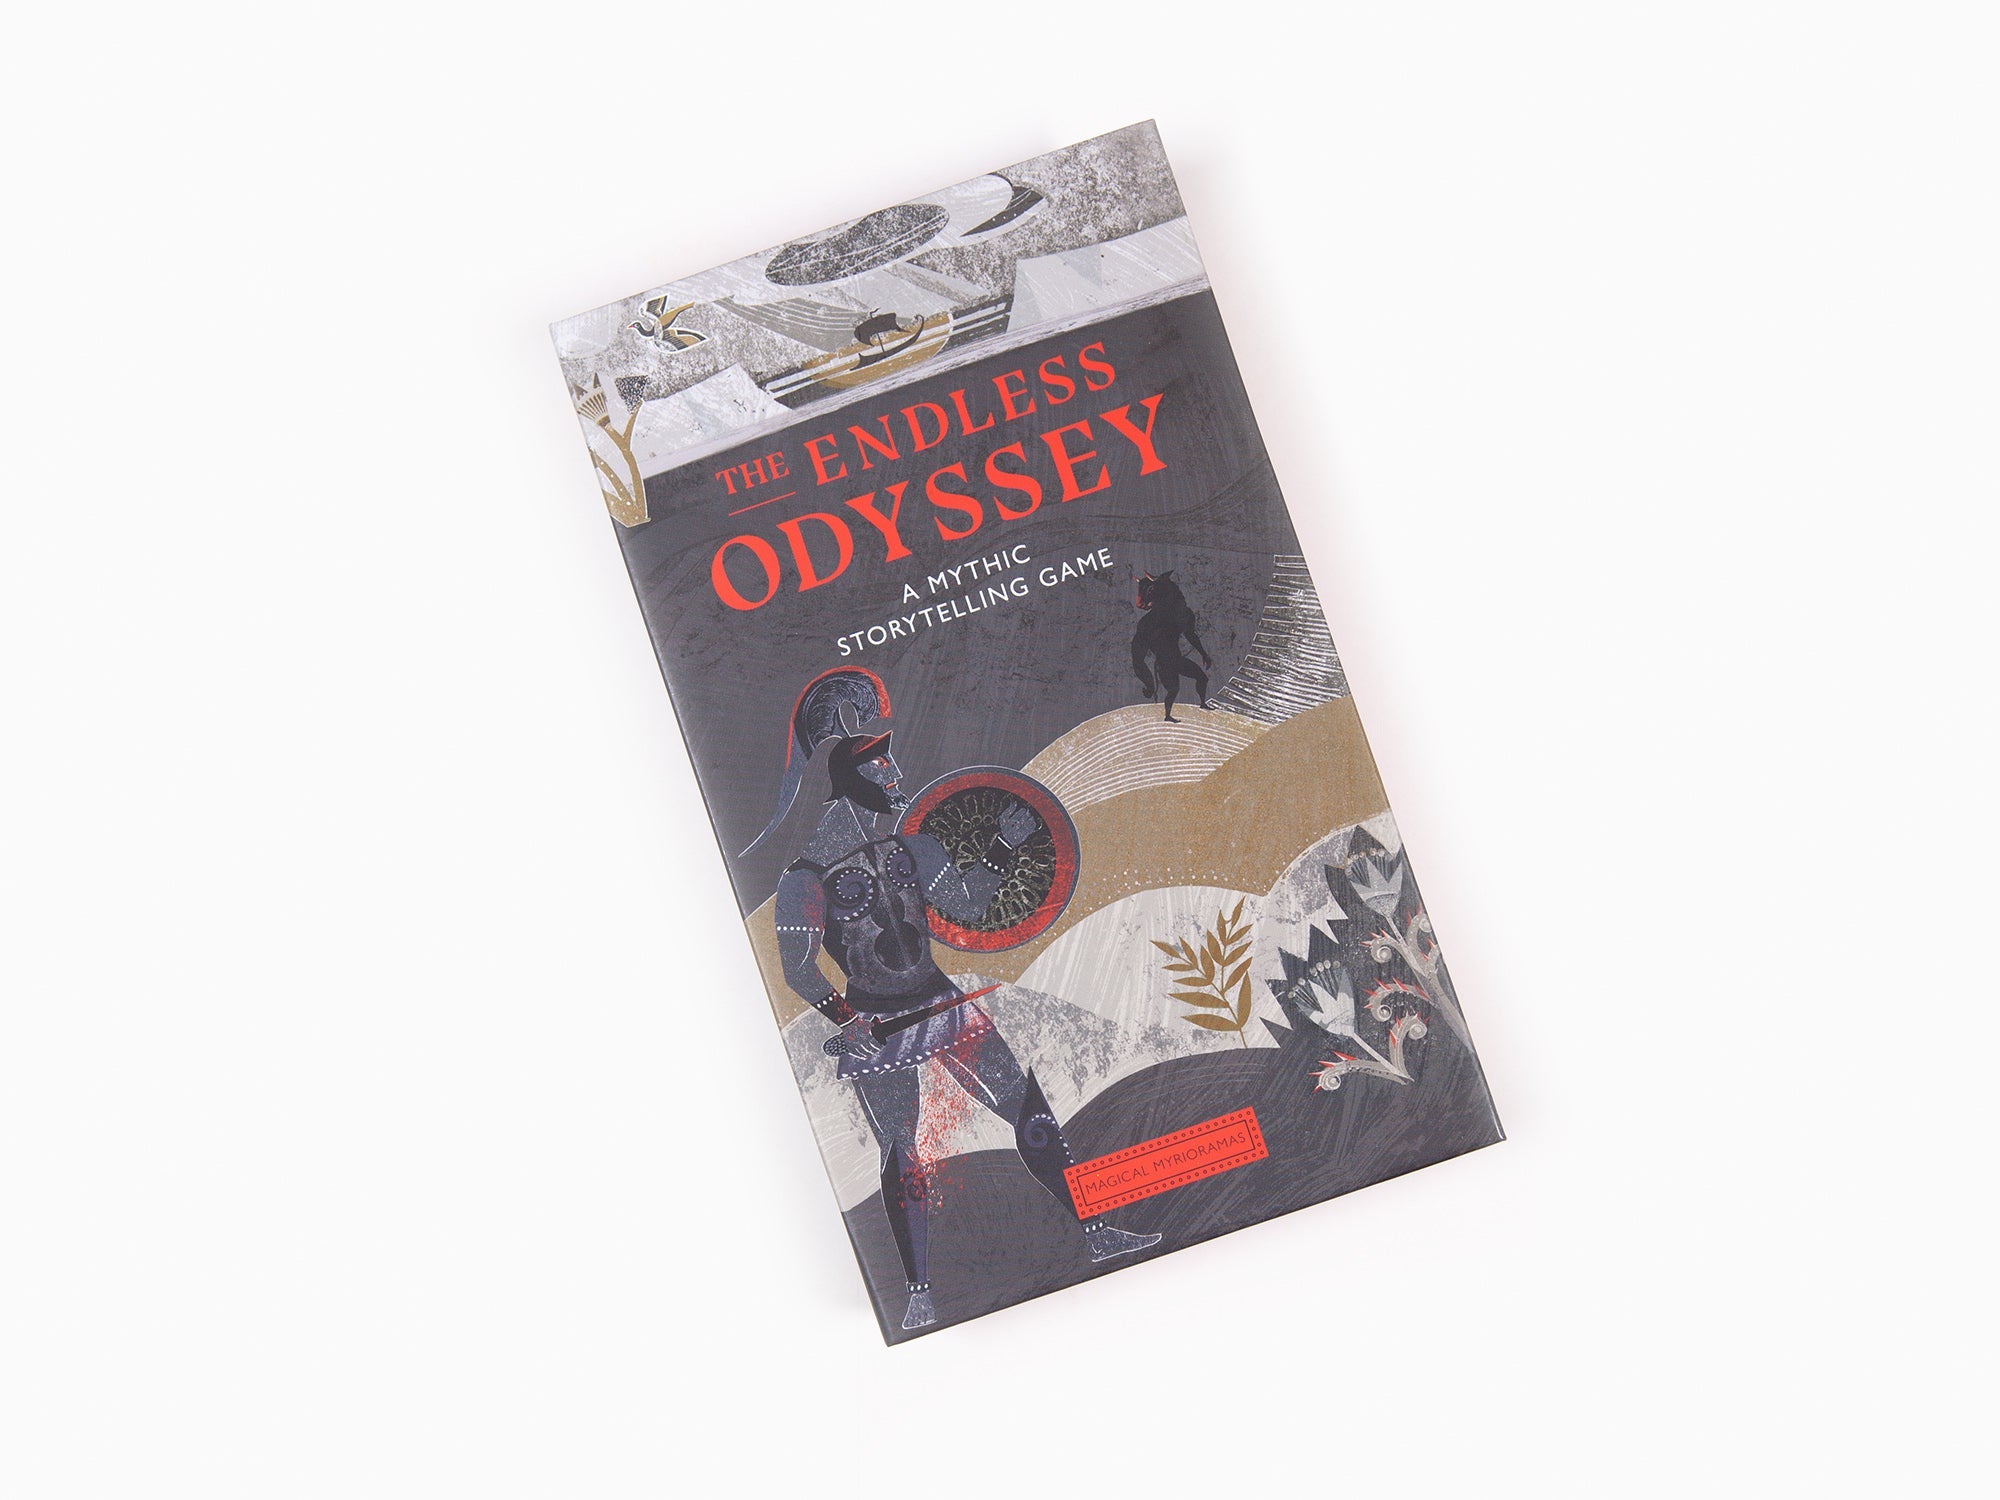 The Endless Odyssey, A Mythic Storytelling Game